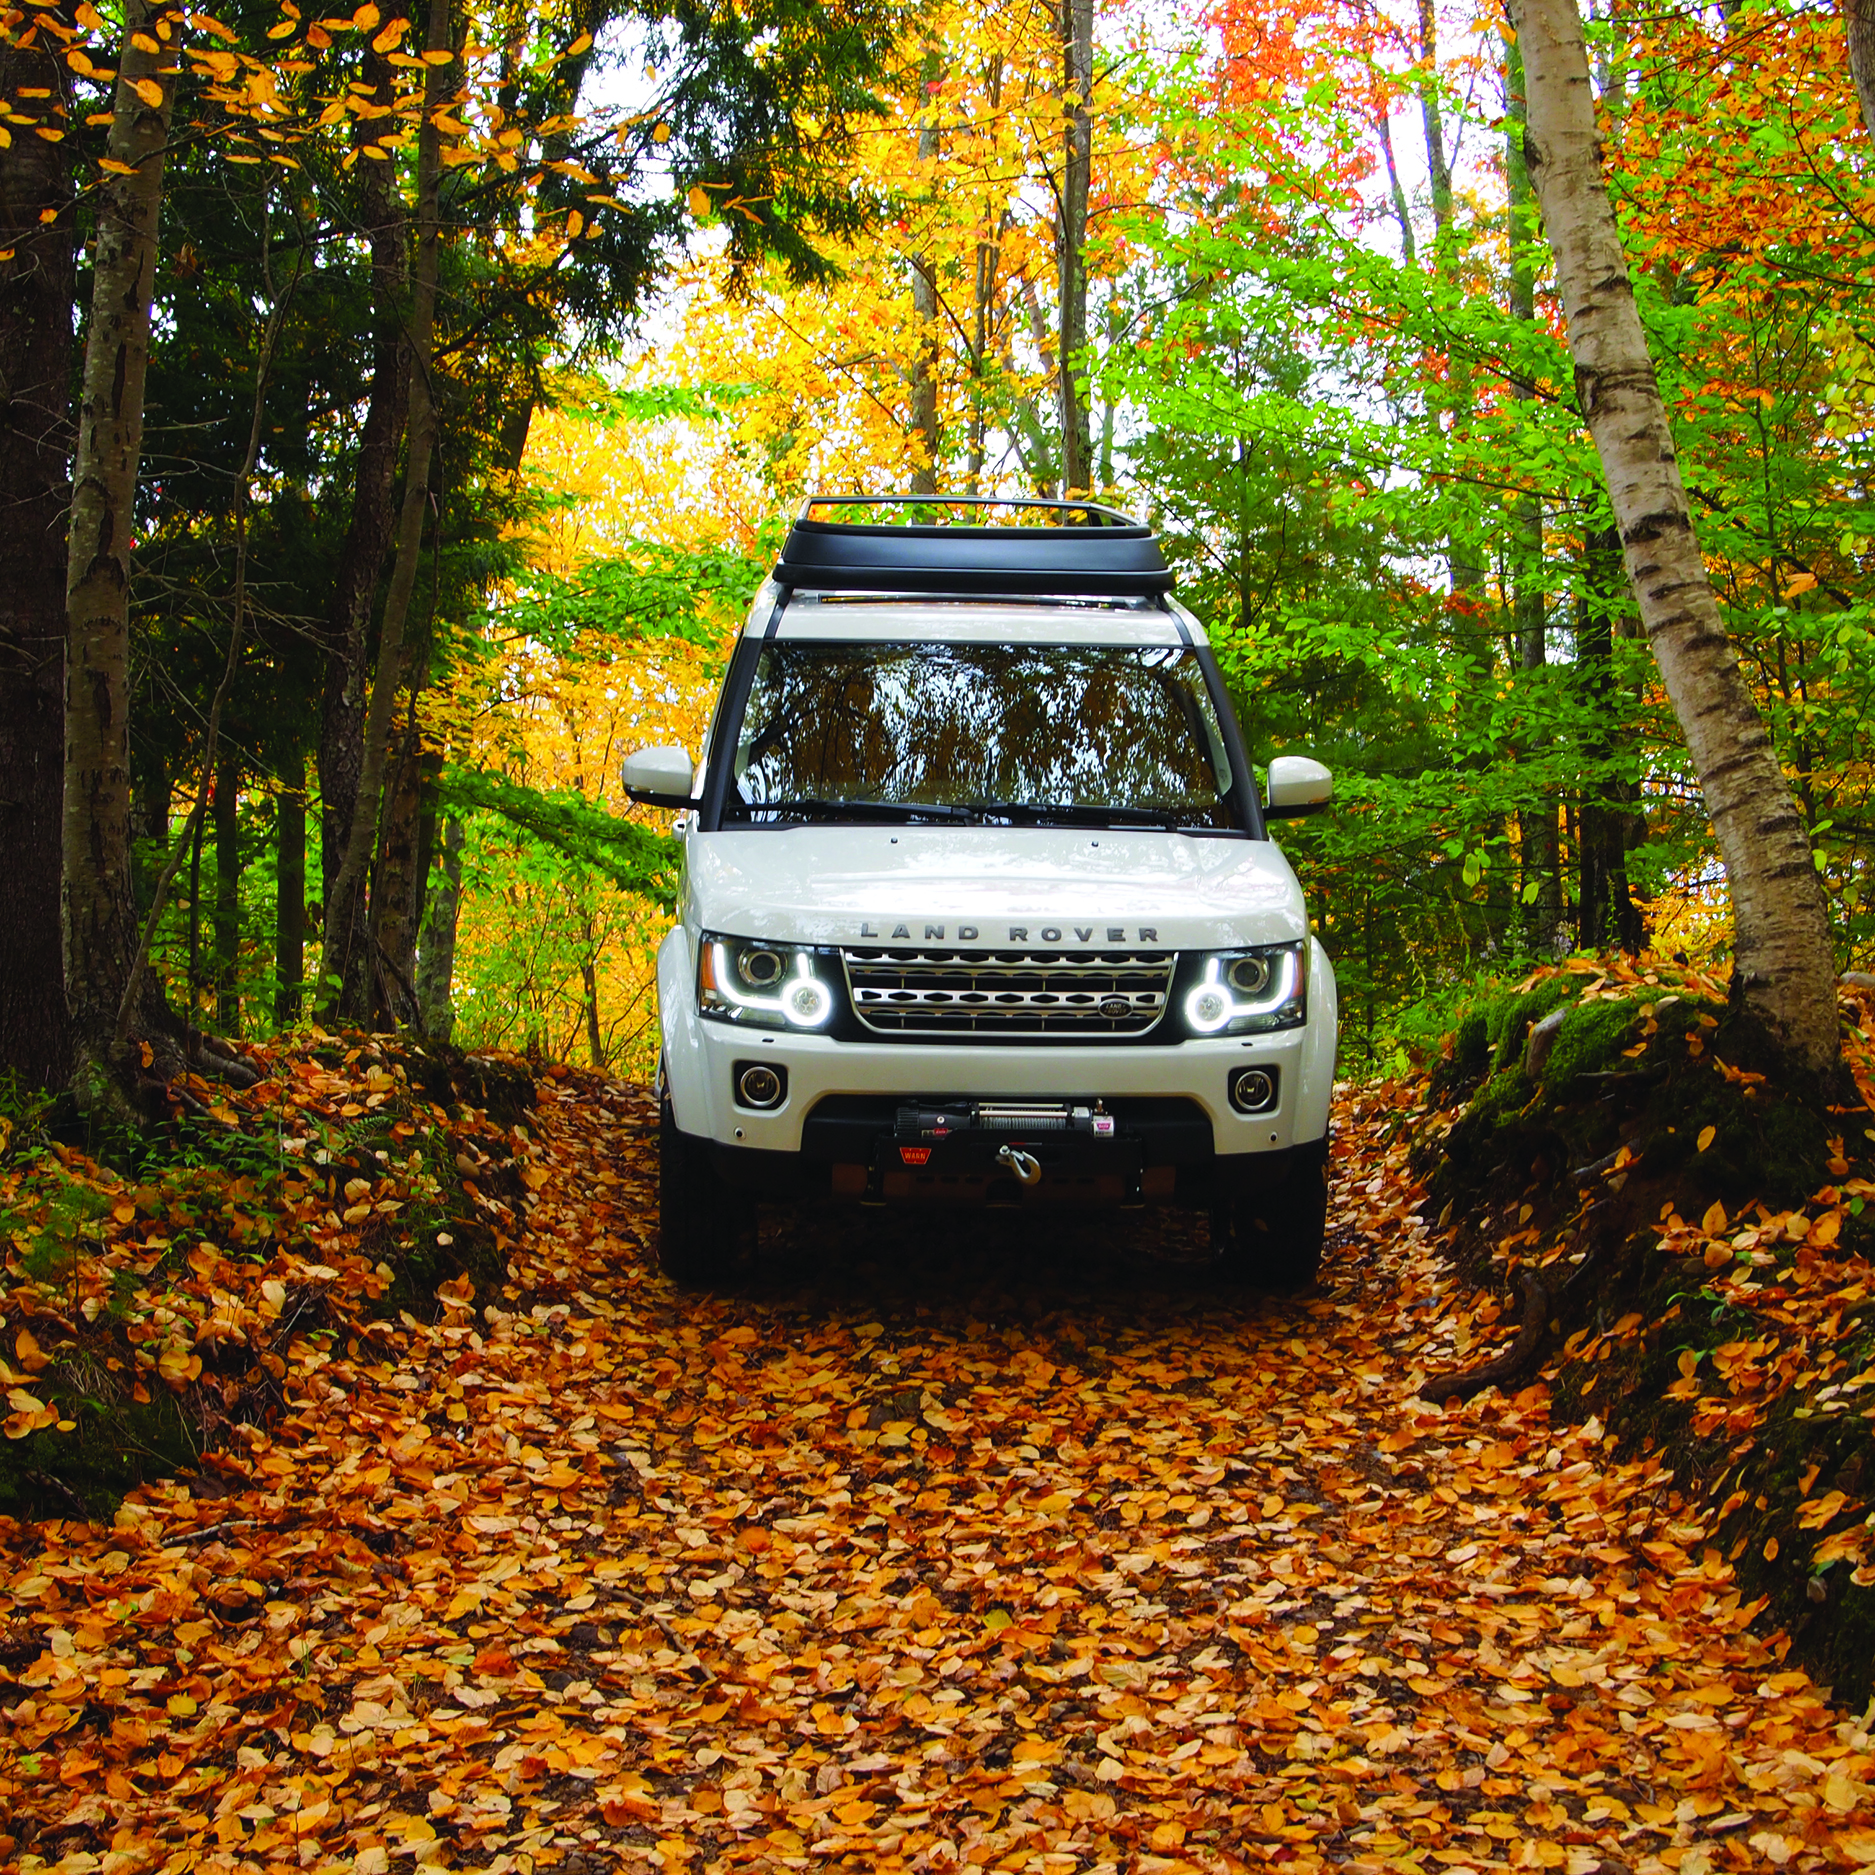 Land Rover driving through woods